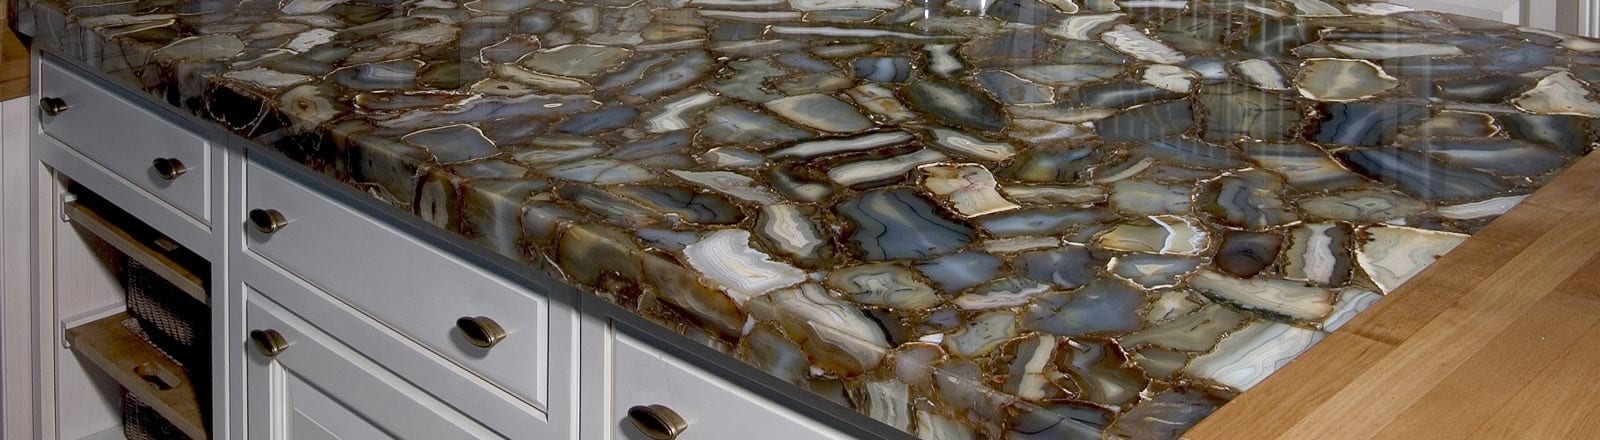 Countertop Repair and Installation by Designer Surfaces in Maryland